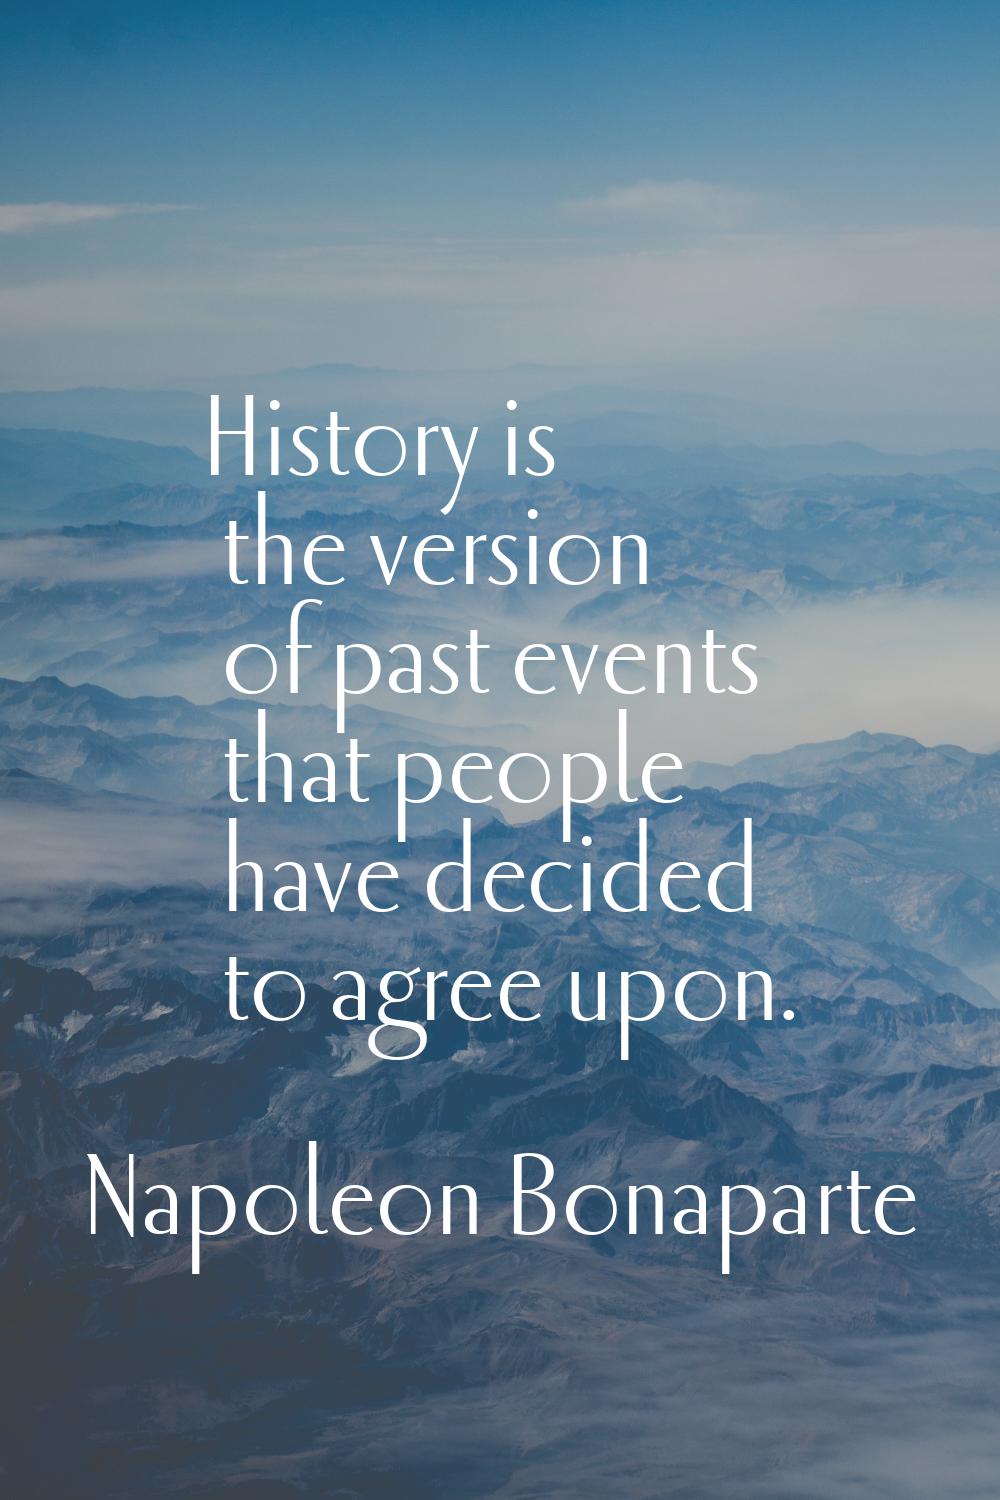 History is the version of past events that people have decided to agree upon.